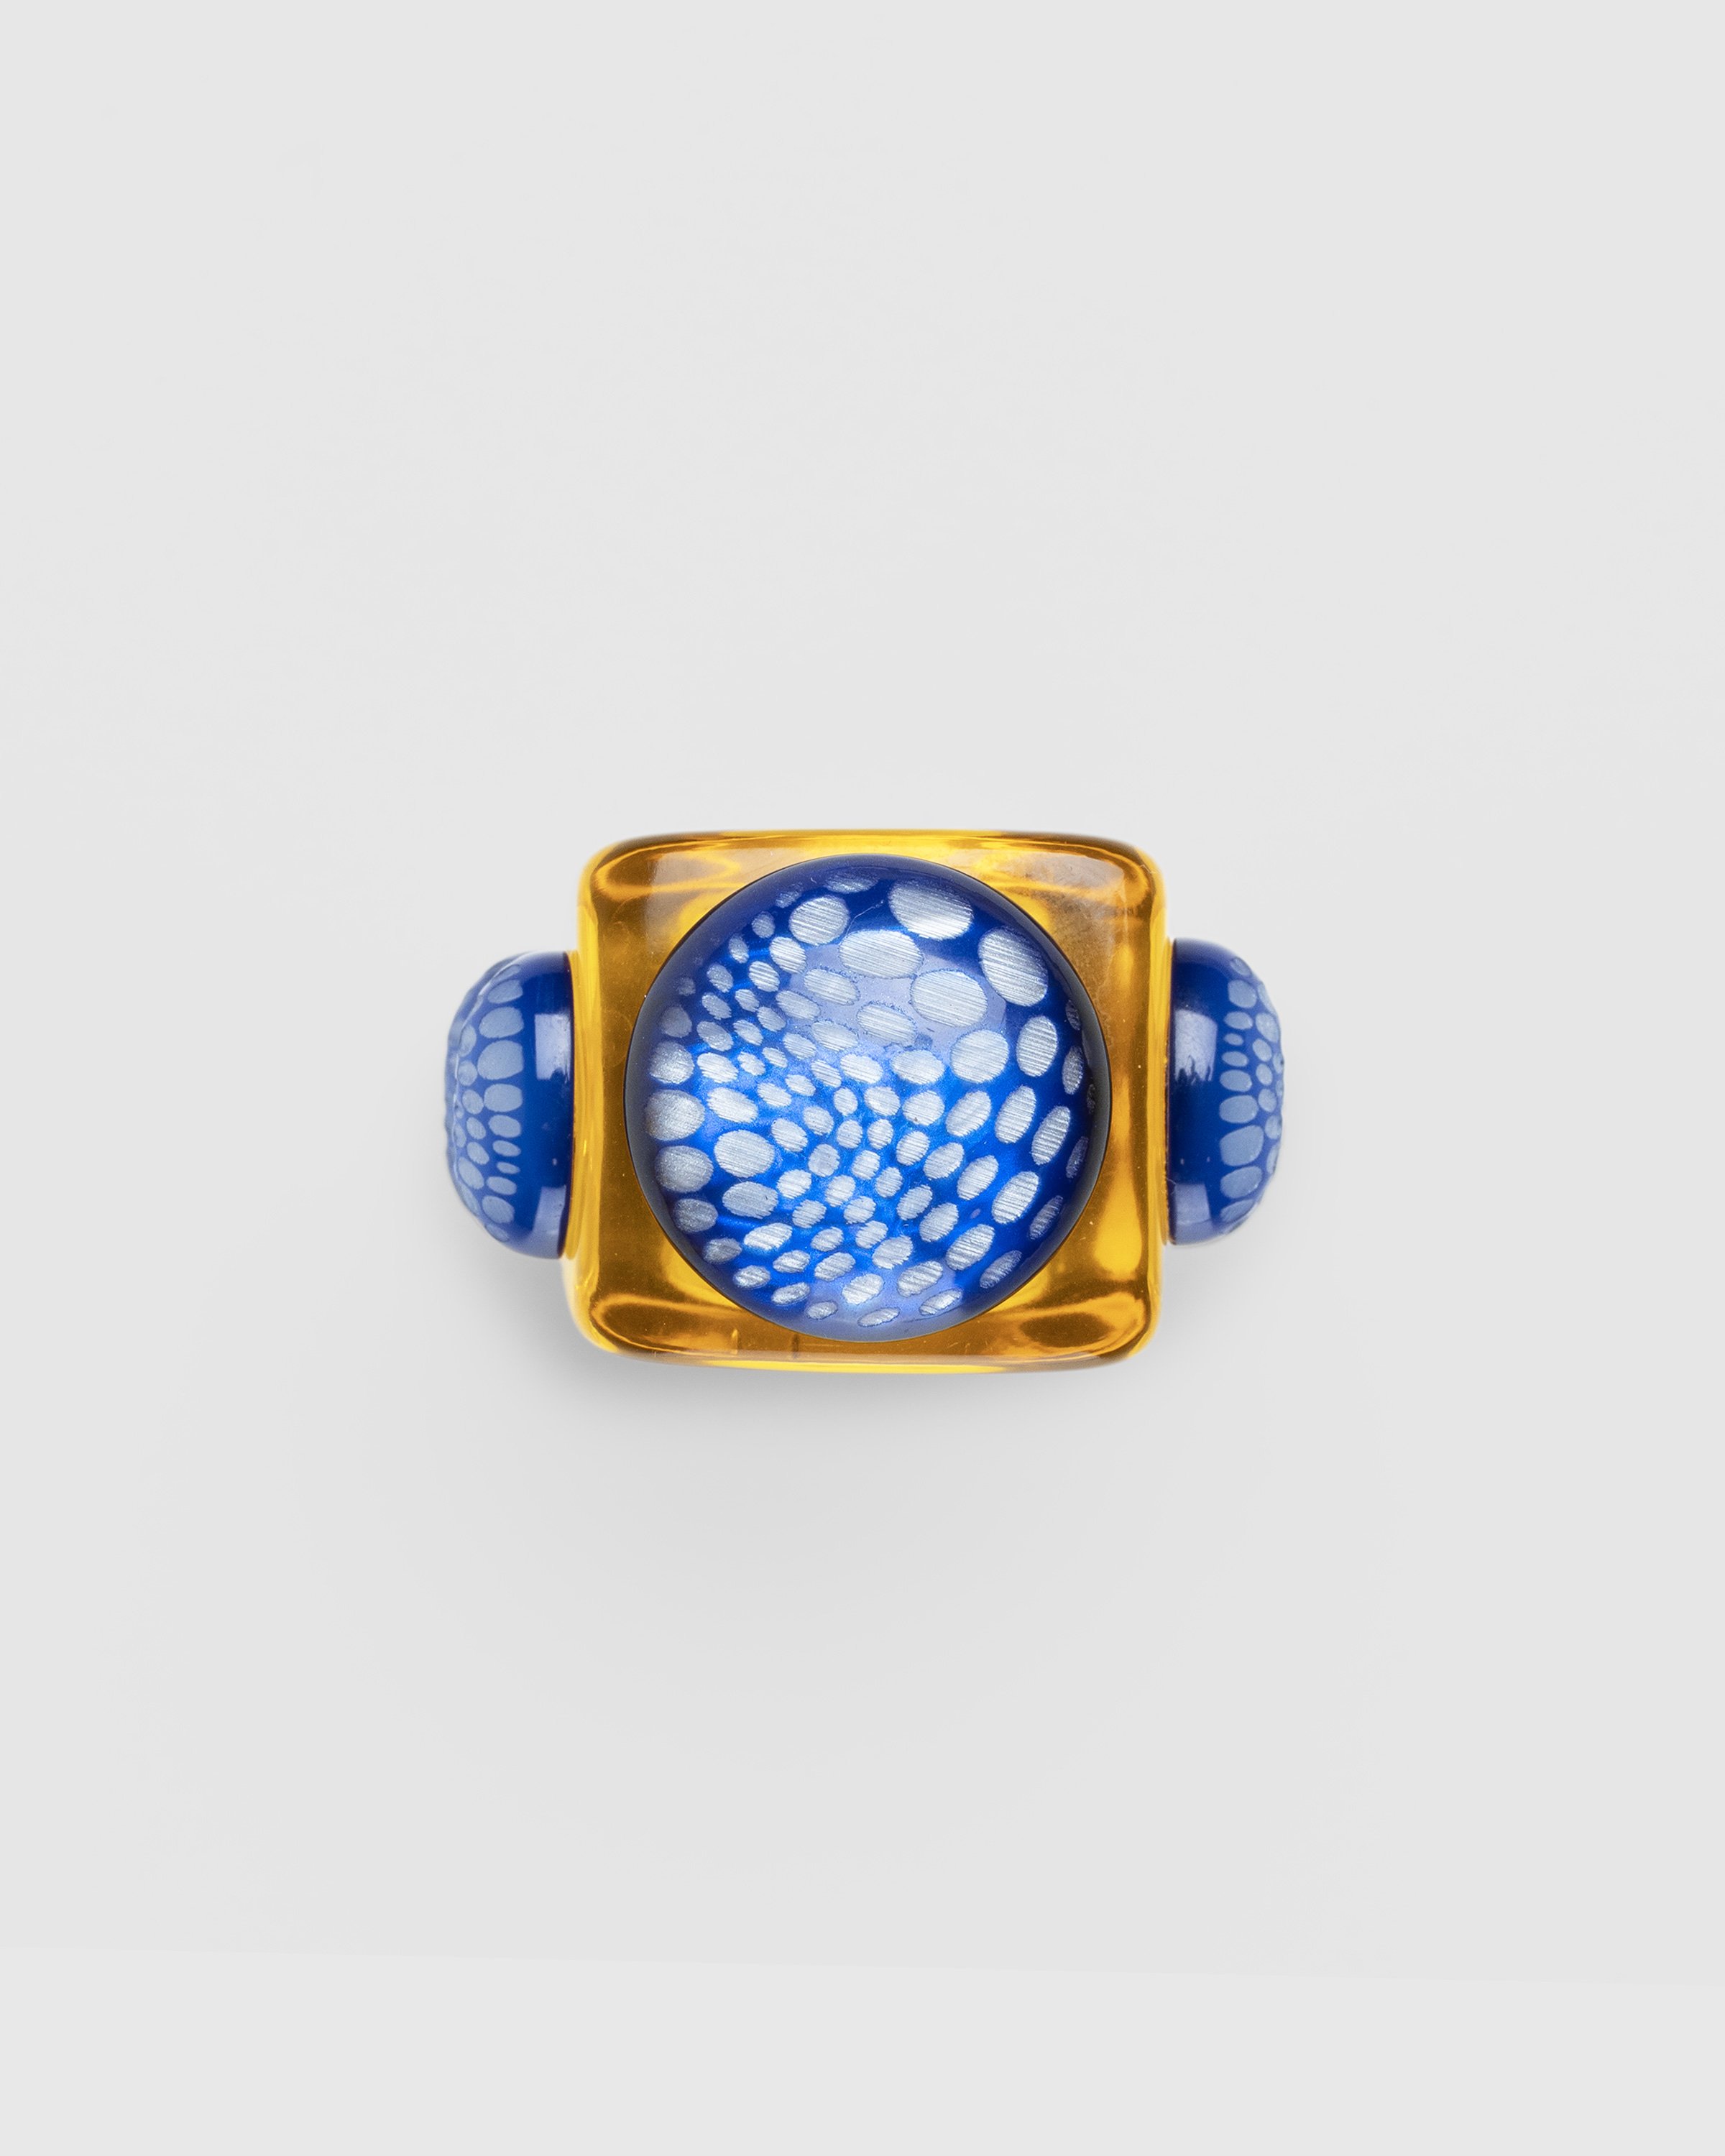 Jean Paul Gaultier - Submarine Ring Amber/Perseo Blue - Accessories - Orange - Image 3